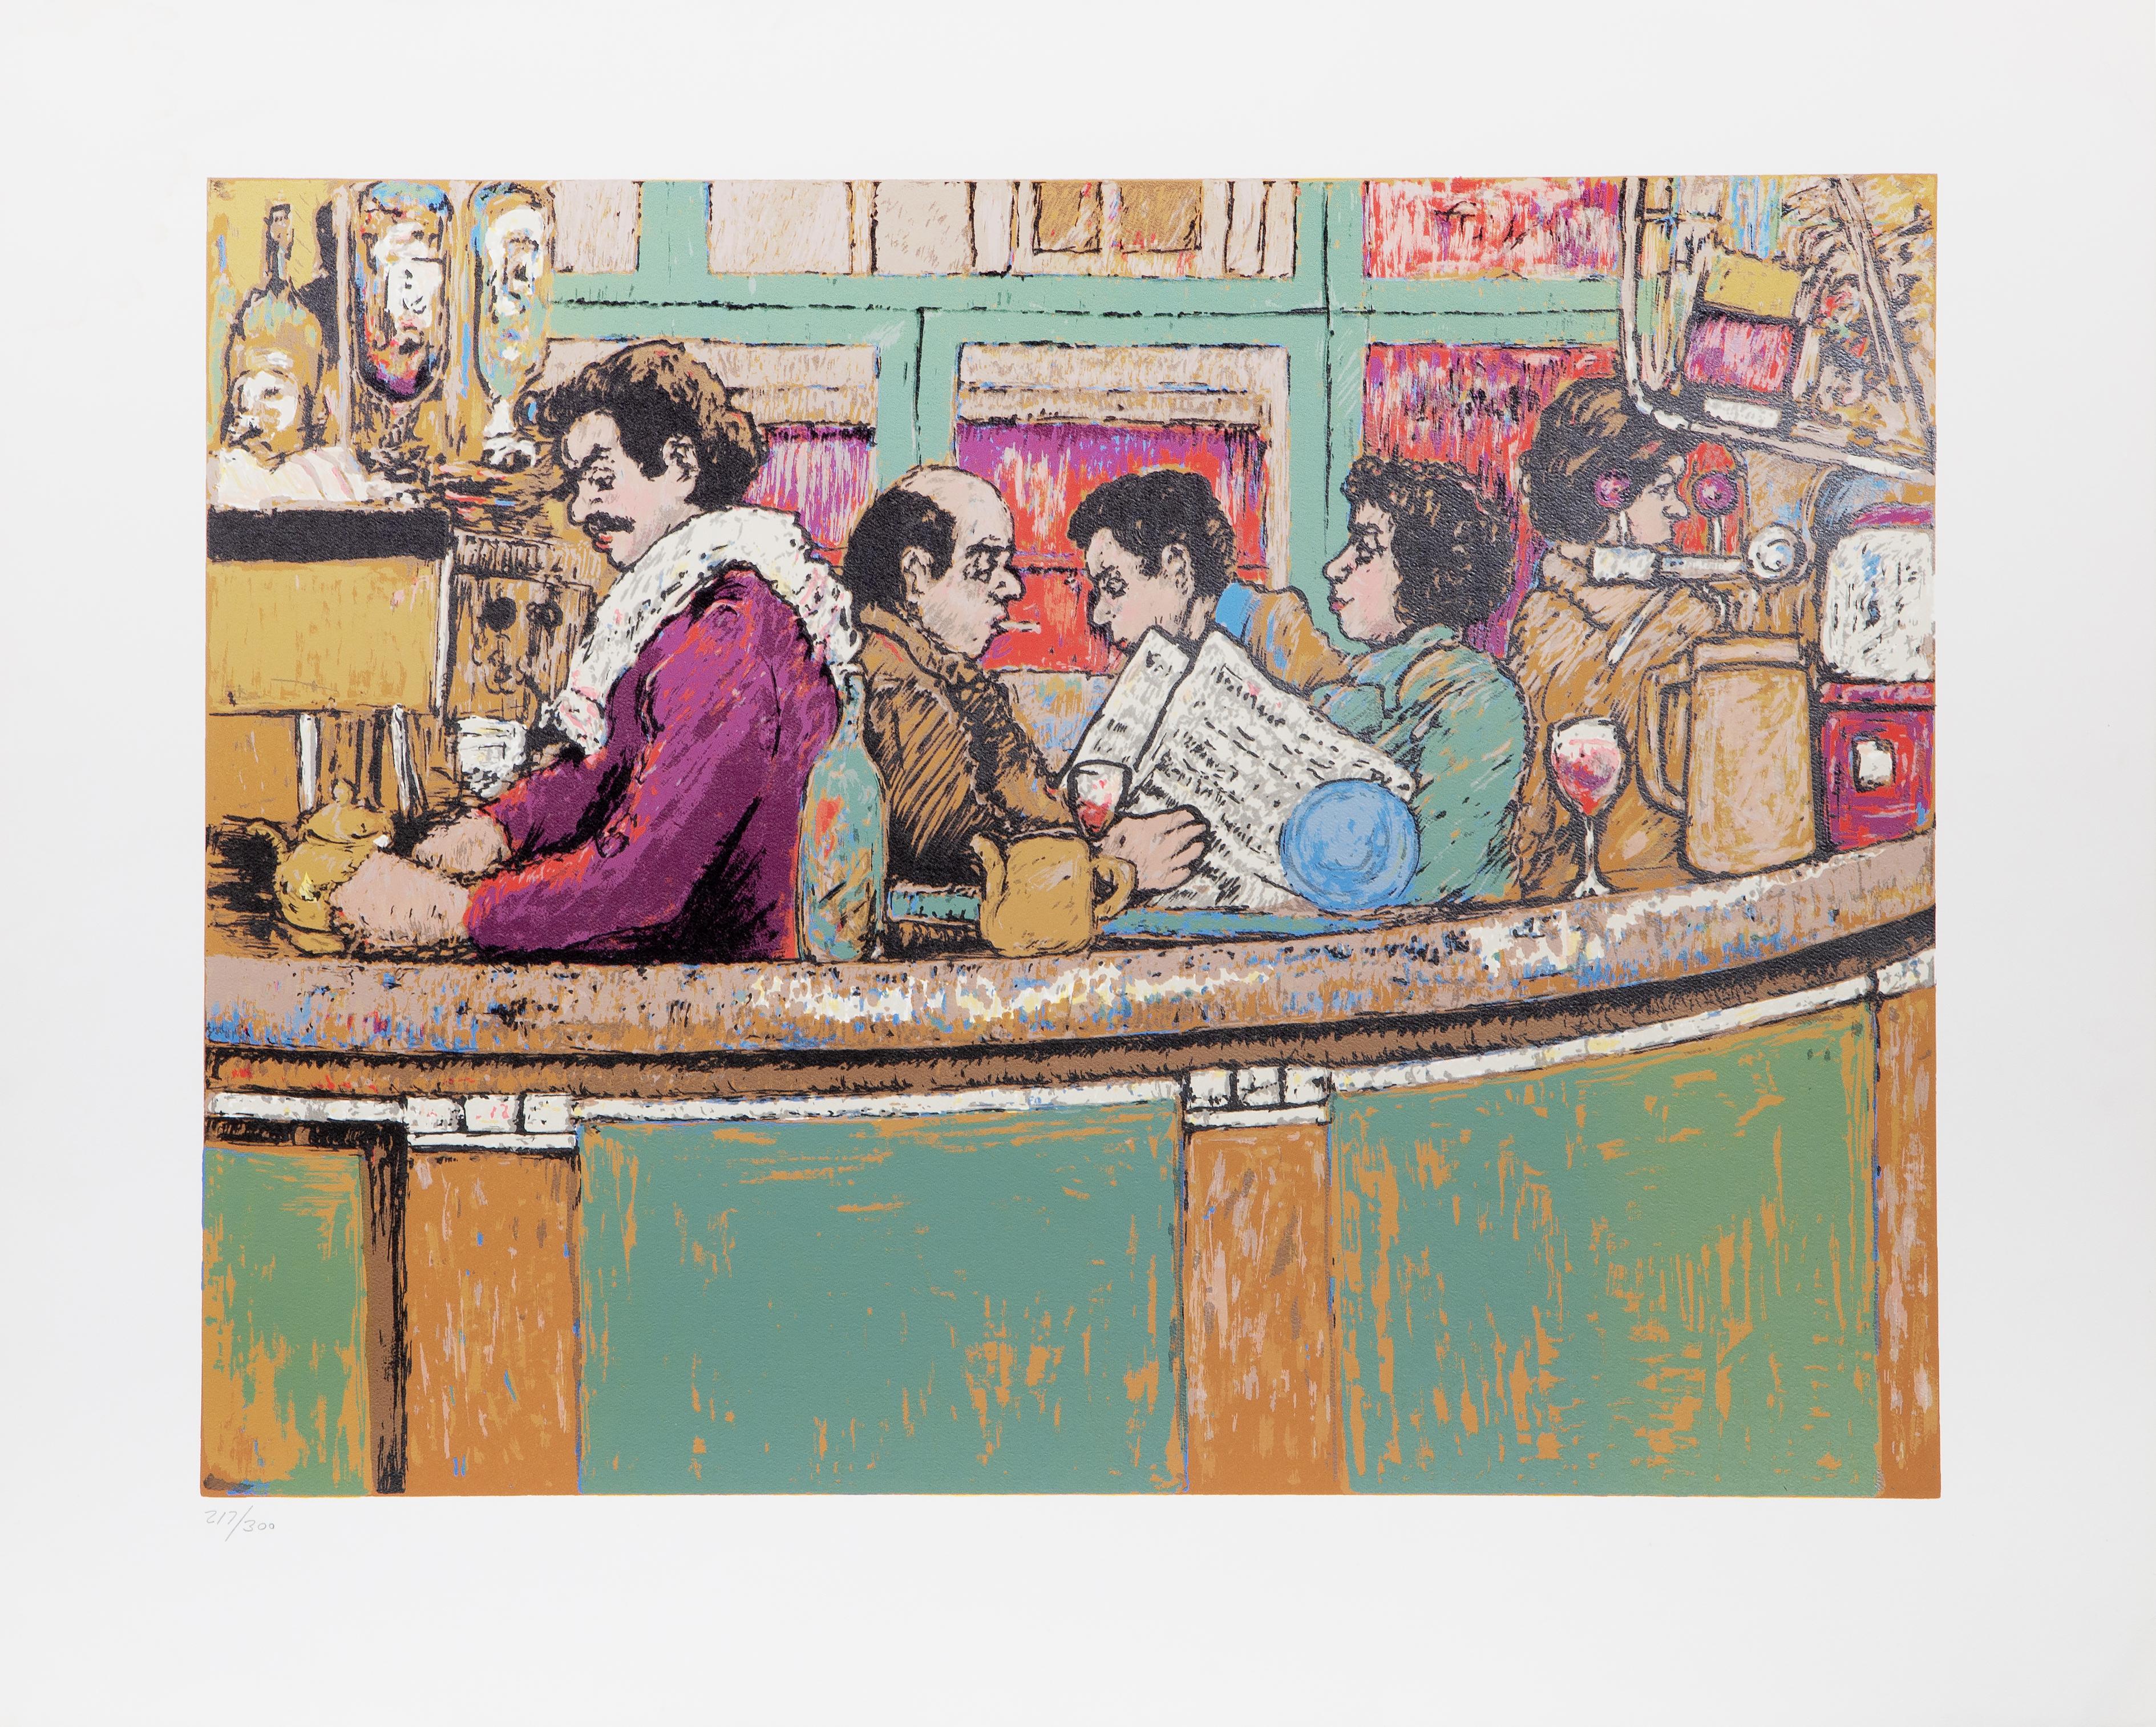 Morning at Cafe
David Azuz, Israeli/French (1942–2014)
Date: circa 1980
Lithograph, numbered in pencil
Edition of 217/300
Image Size: 19.75 x 26 inches
Size: 26 x 32.5 in. (66.04 x 82.55 cm)